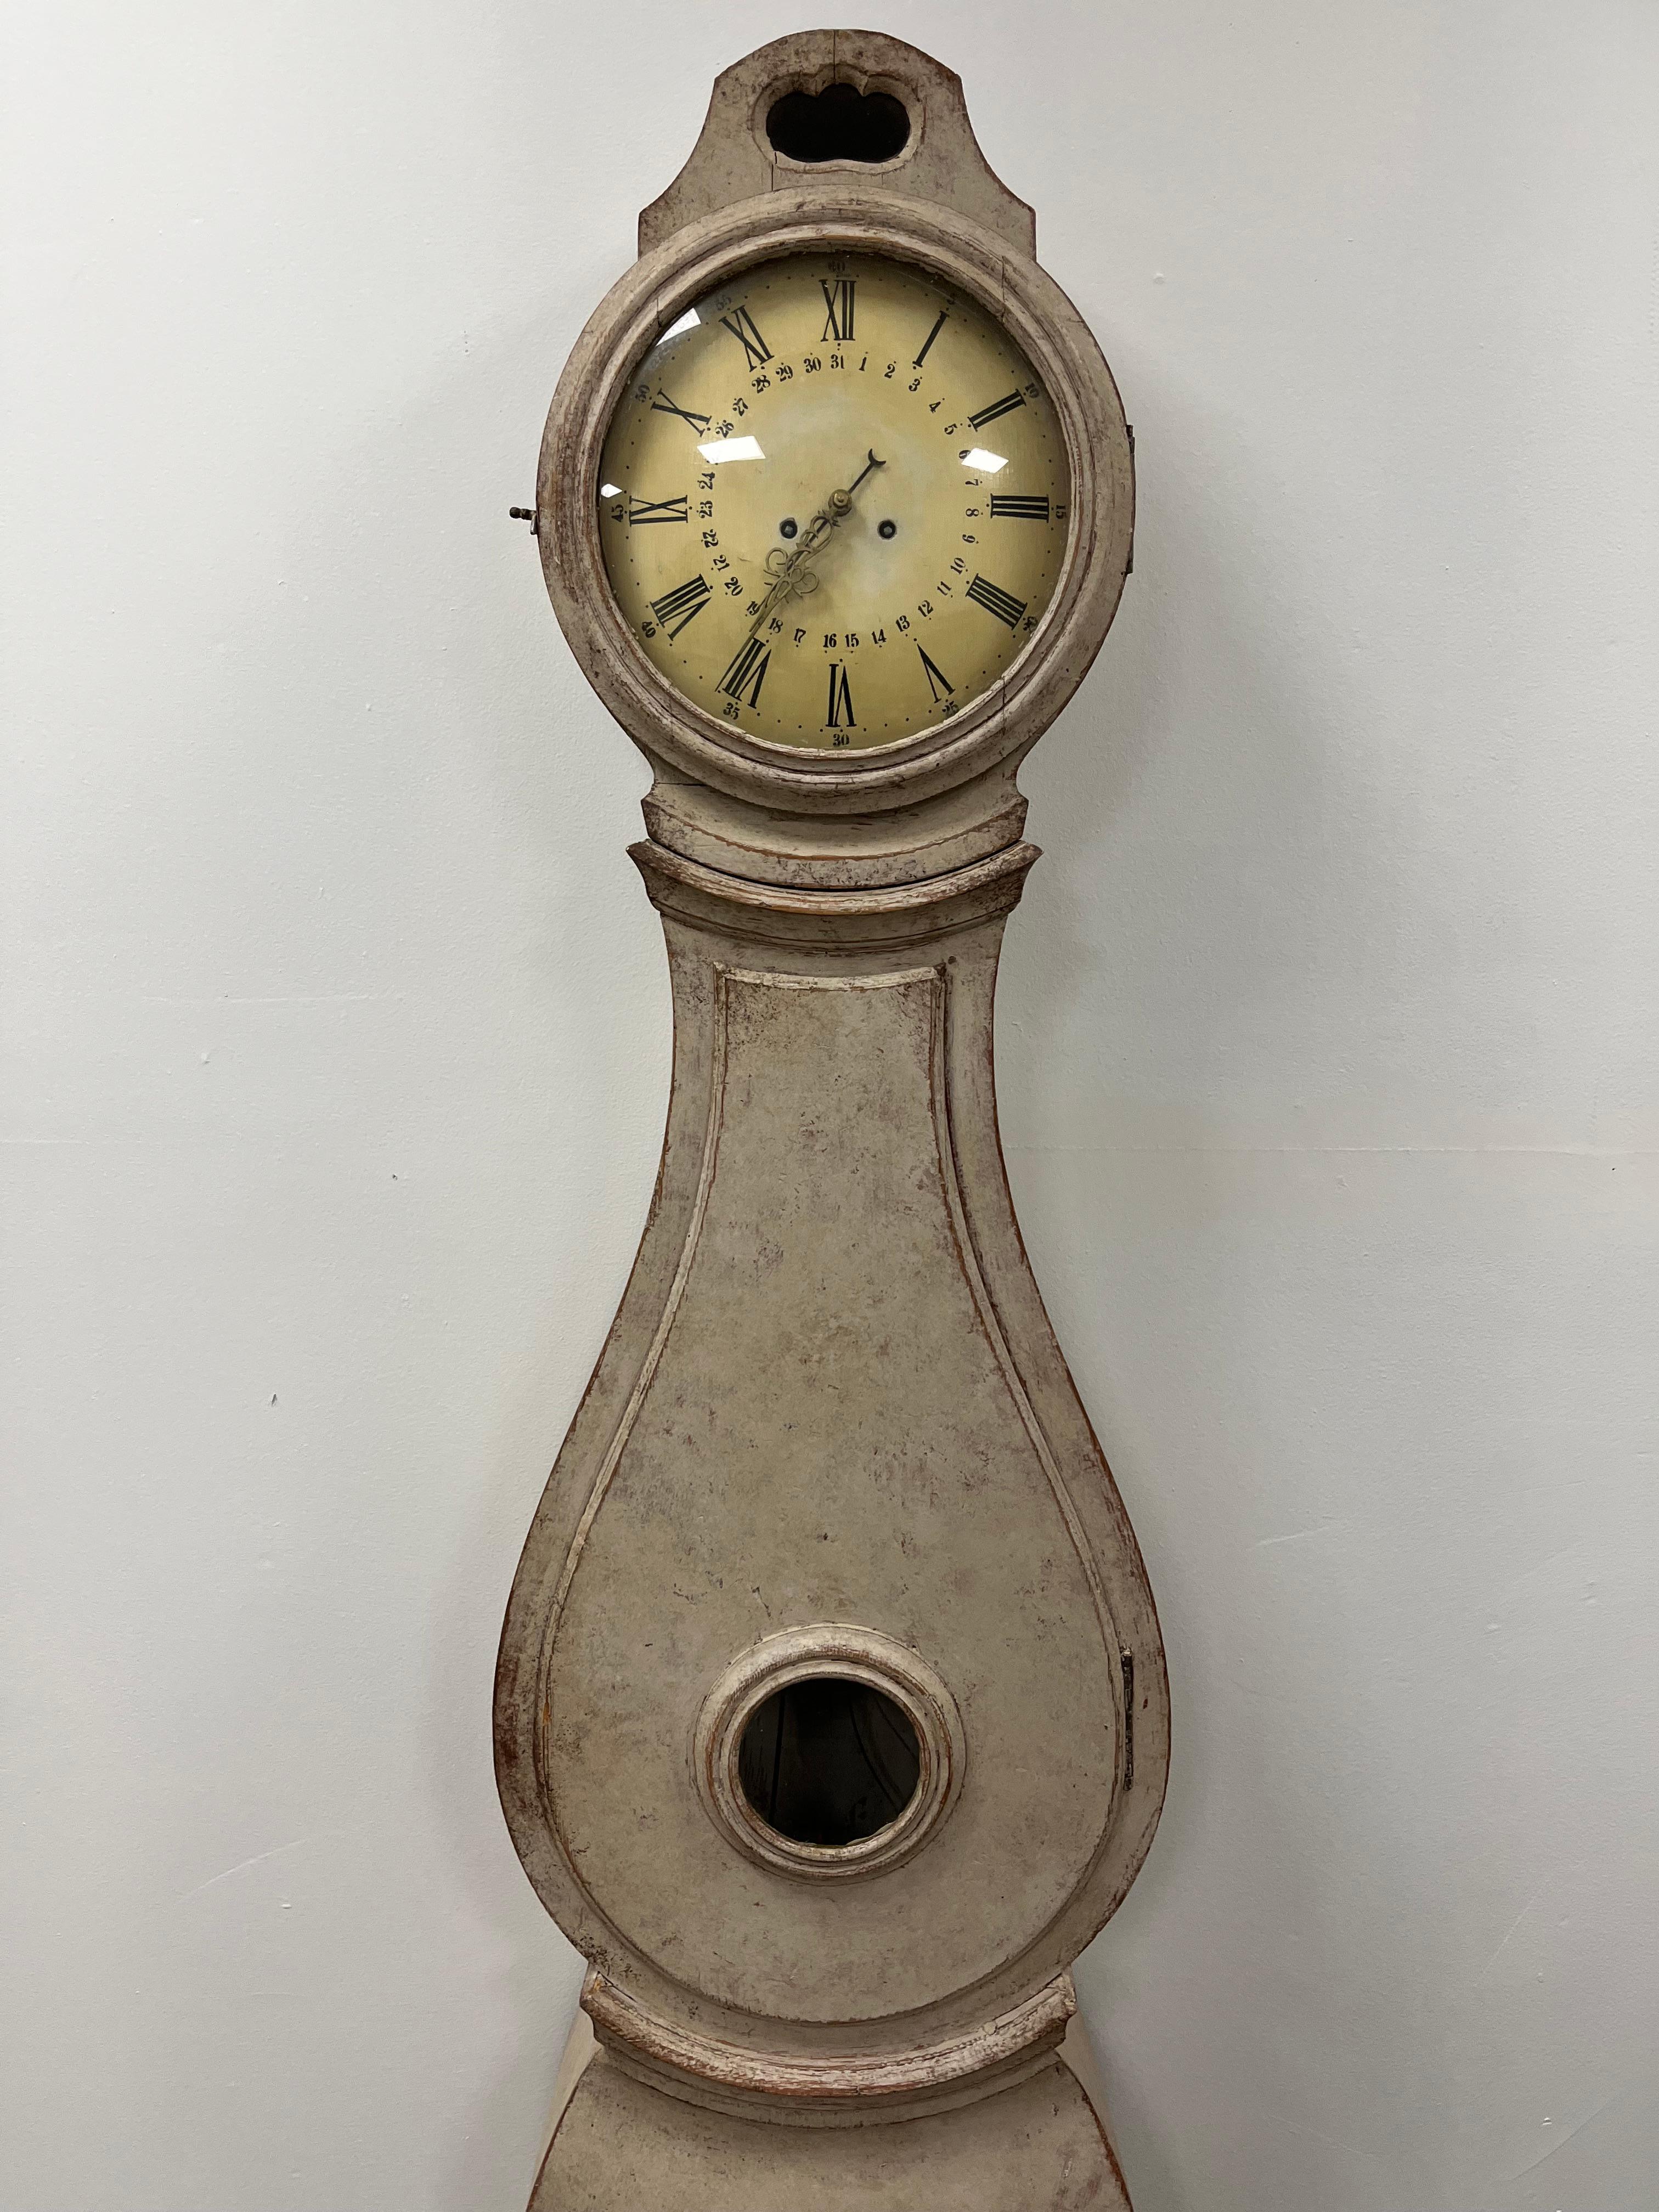 A unique Swedish case clock. Tastefully repainted. Sold as a decorative piece, no mechanical guarantee. Weights, pendulum and key included.